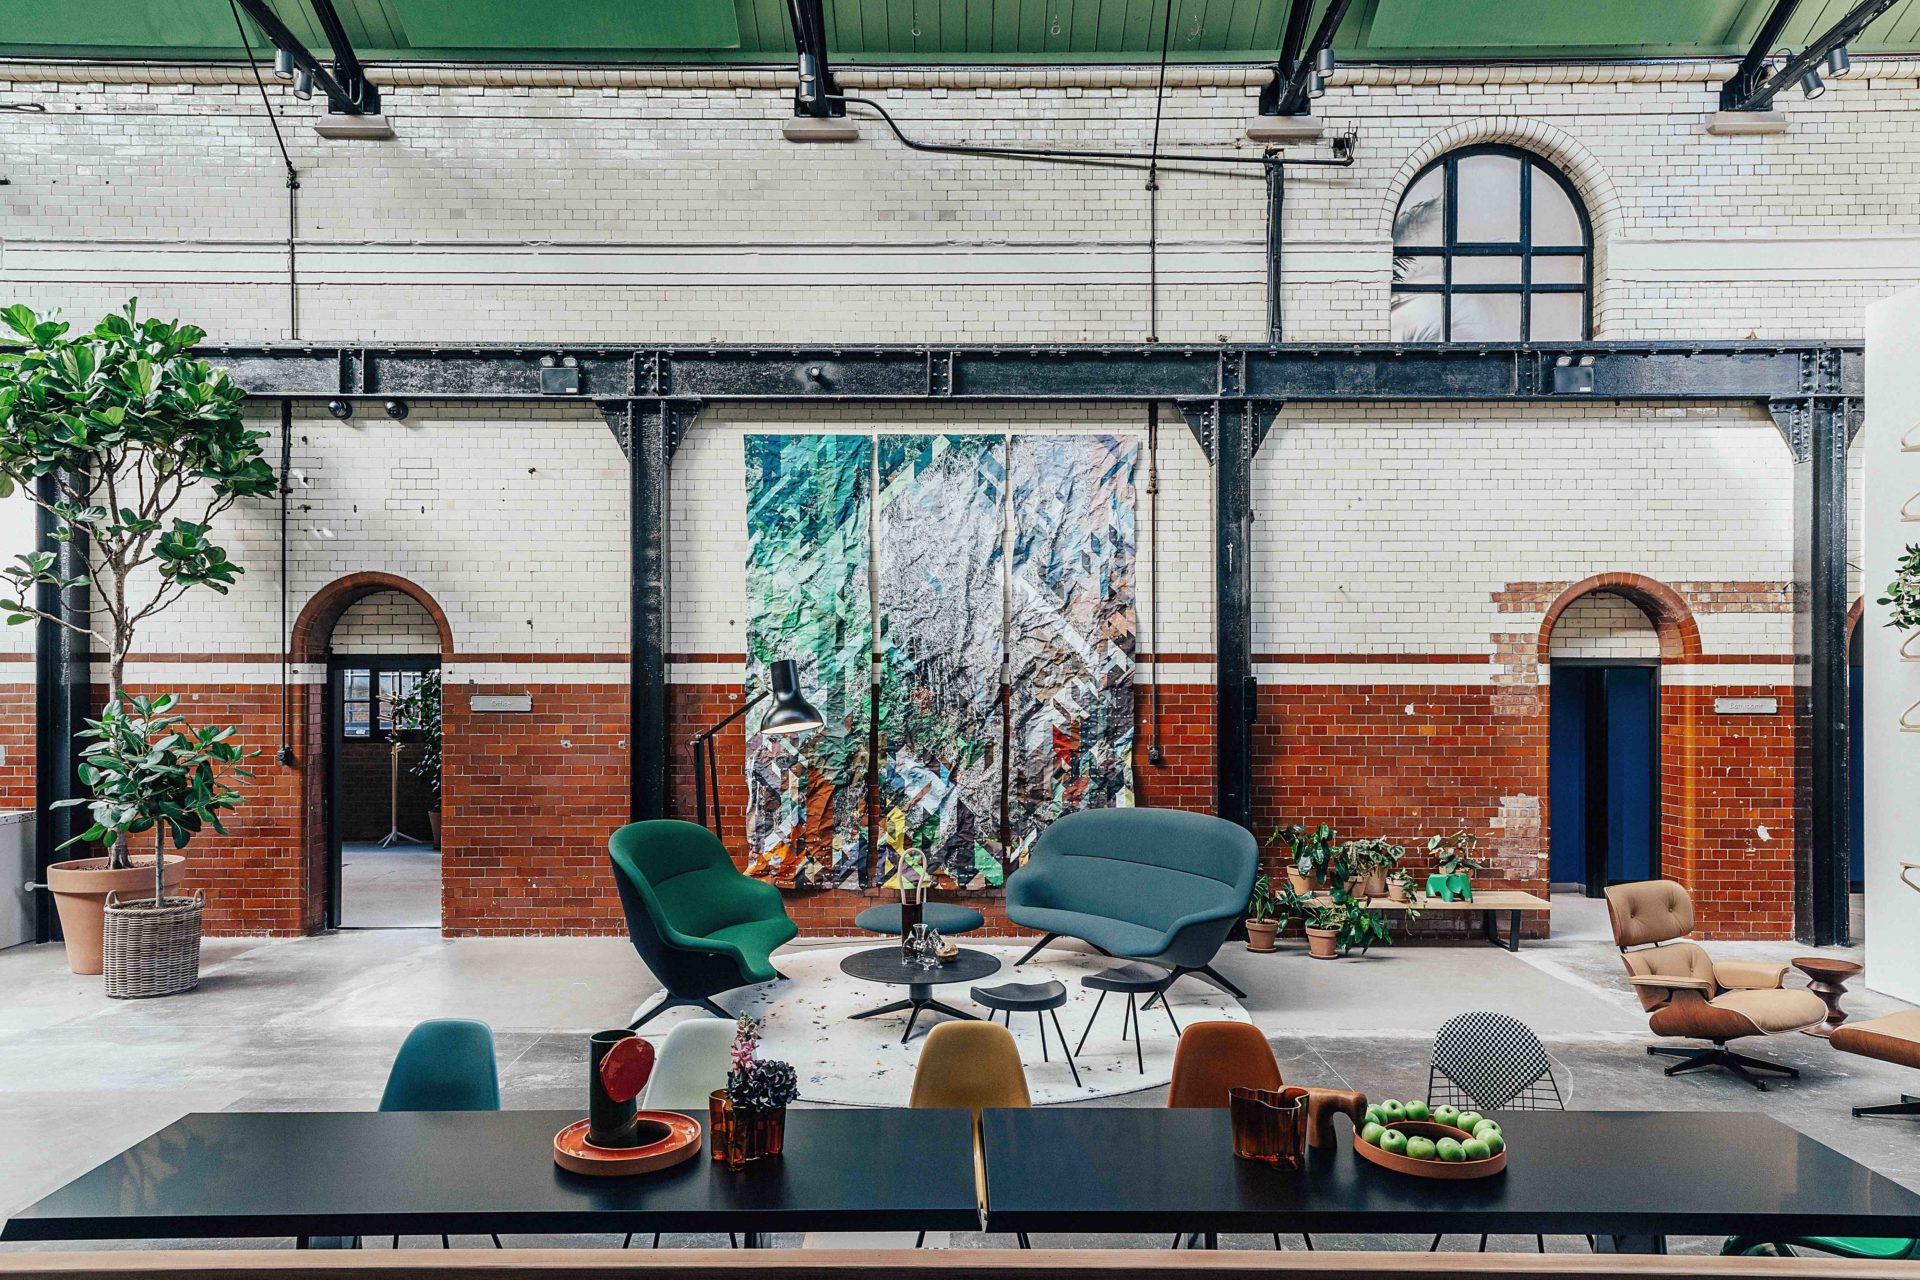 Vitra opens their new flagship UK Showroom in the historic London Tramshed building